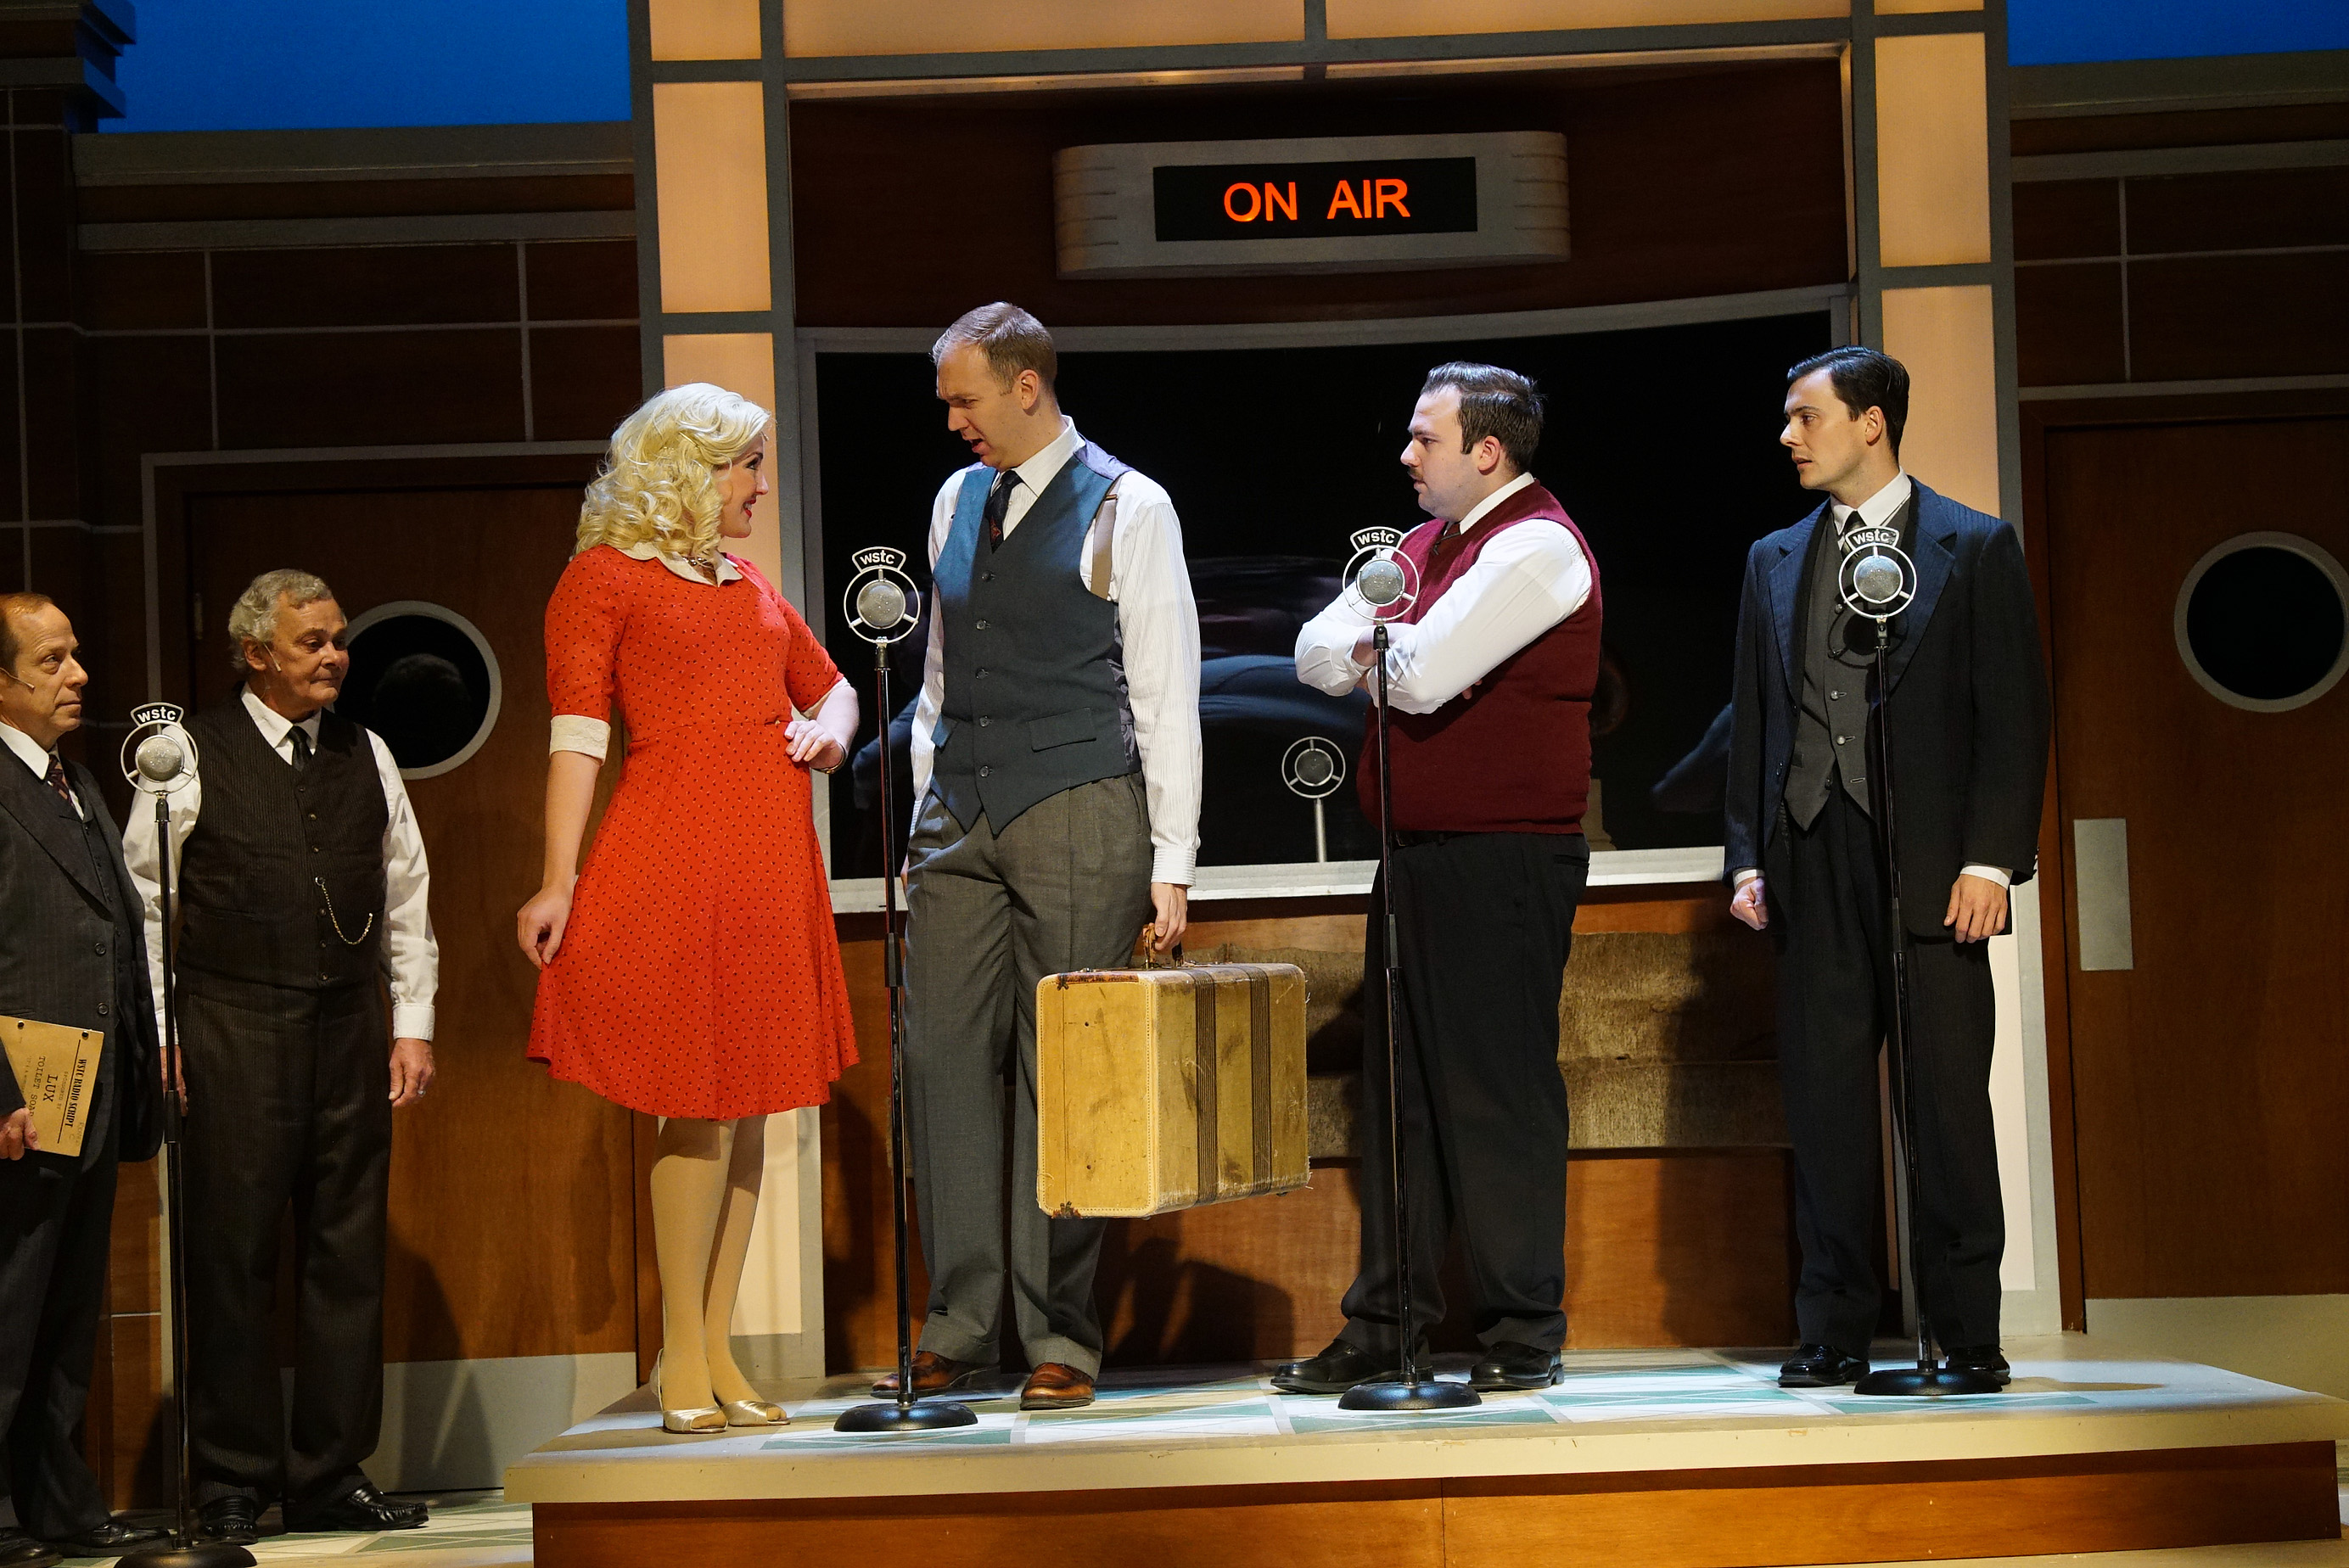 Photo of Sudbury Theatre Centre's production of "It's A Wonderful Life" by Robert Provencher. Actors from left to right: Richard Alan Campbell, Robbie O'Neill, Jessica Vandenberg, Mark Crawford, Richard Barlow, and Kelly Penner